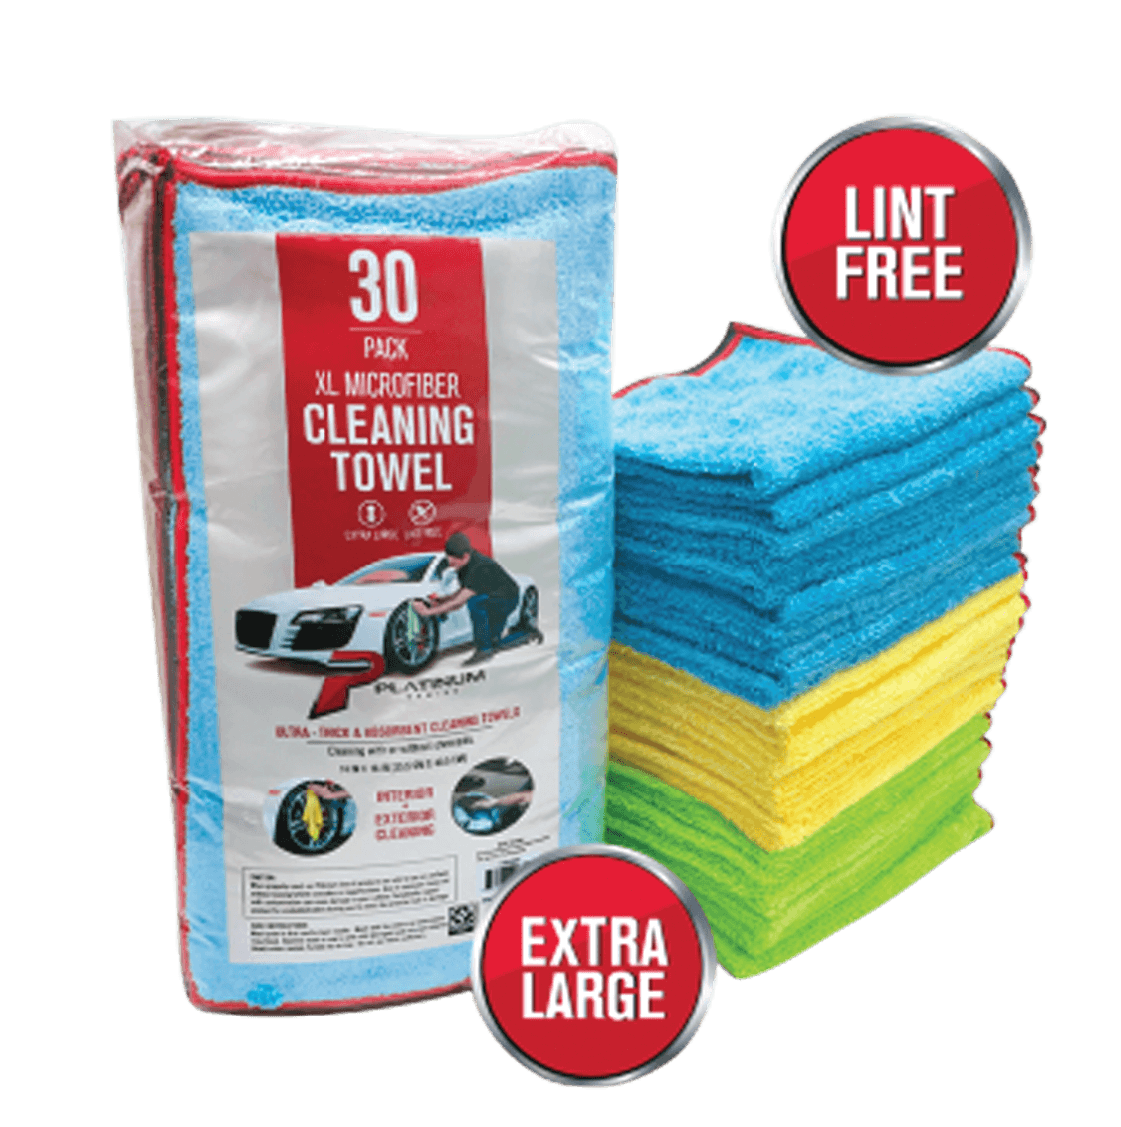 XL Microfiber Cleaning Towel – 30 Pack - Extra-large Microfiber